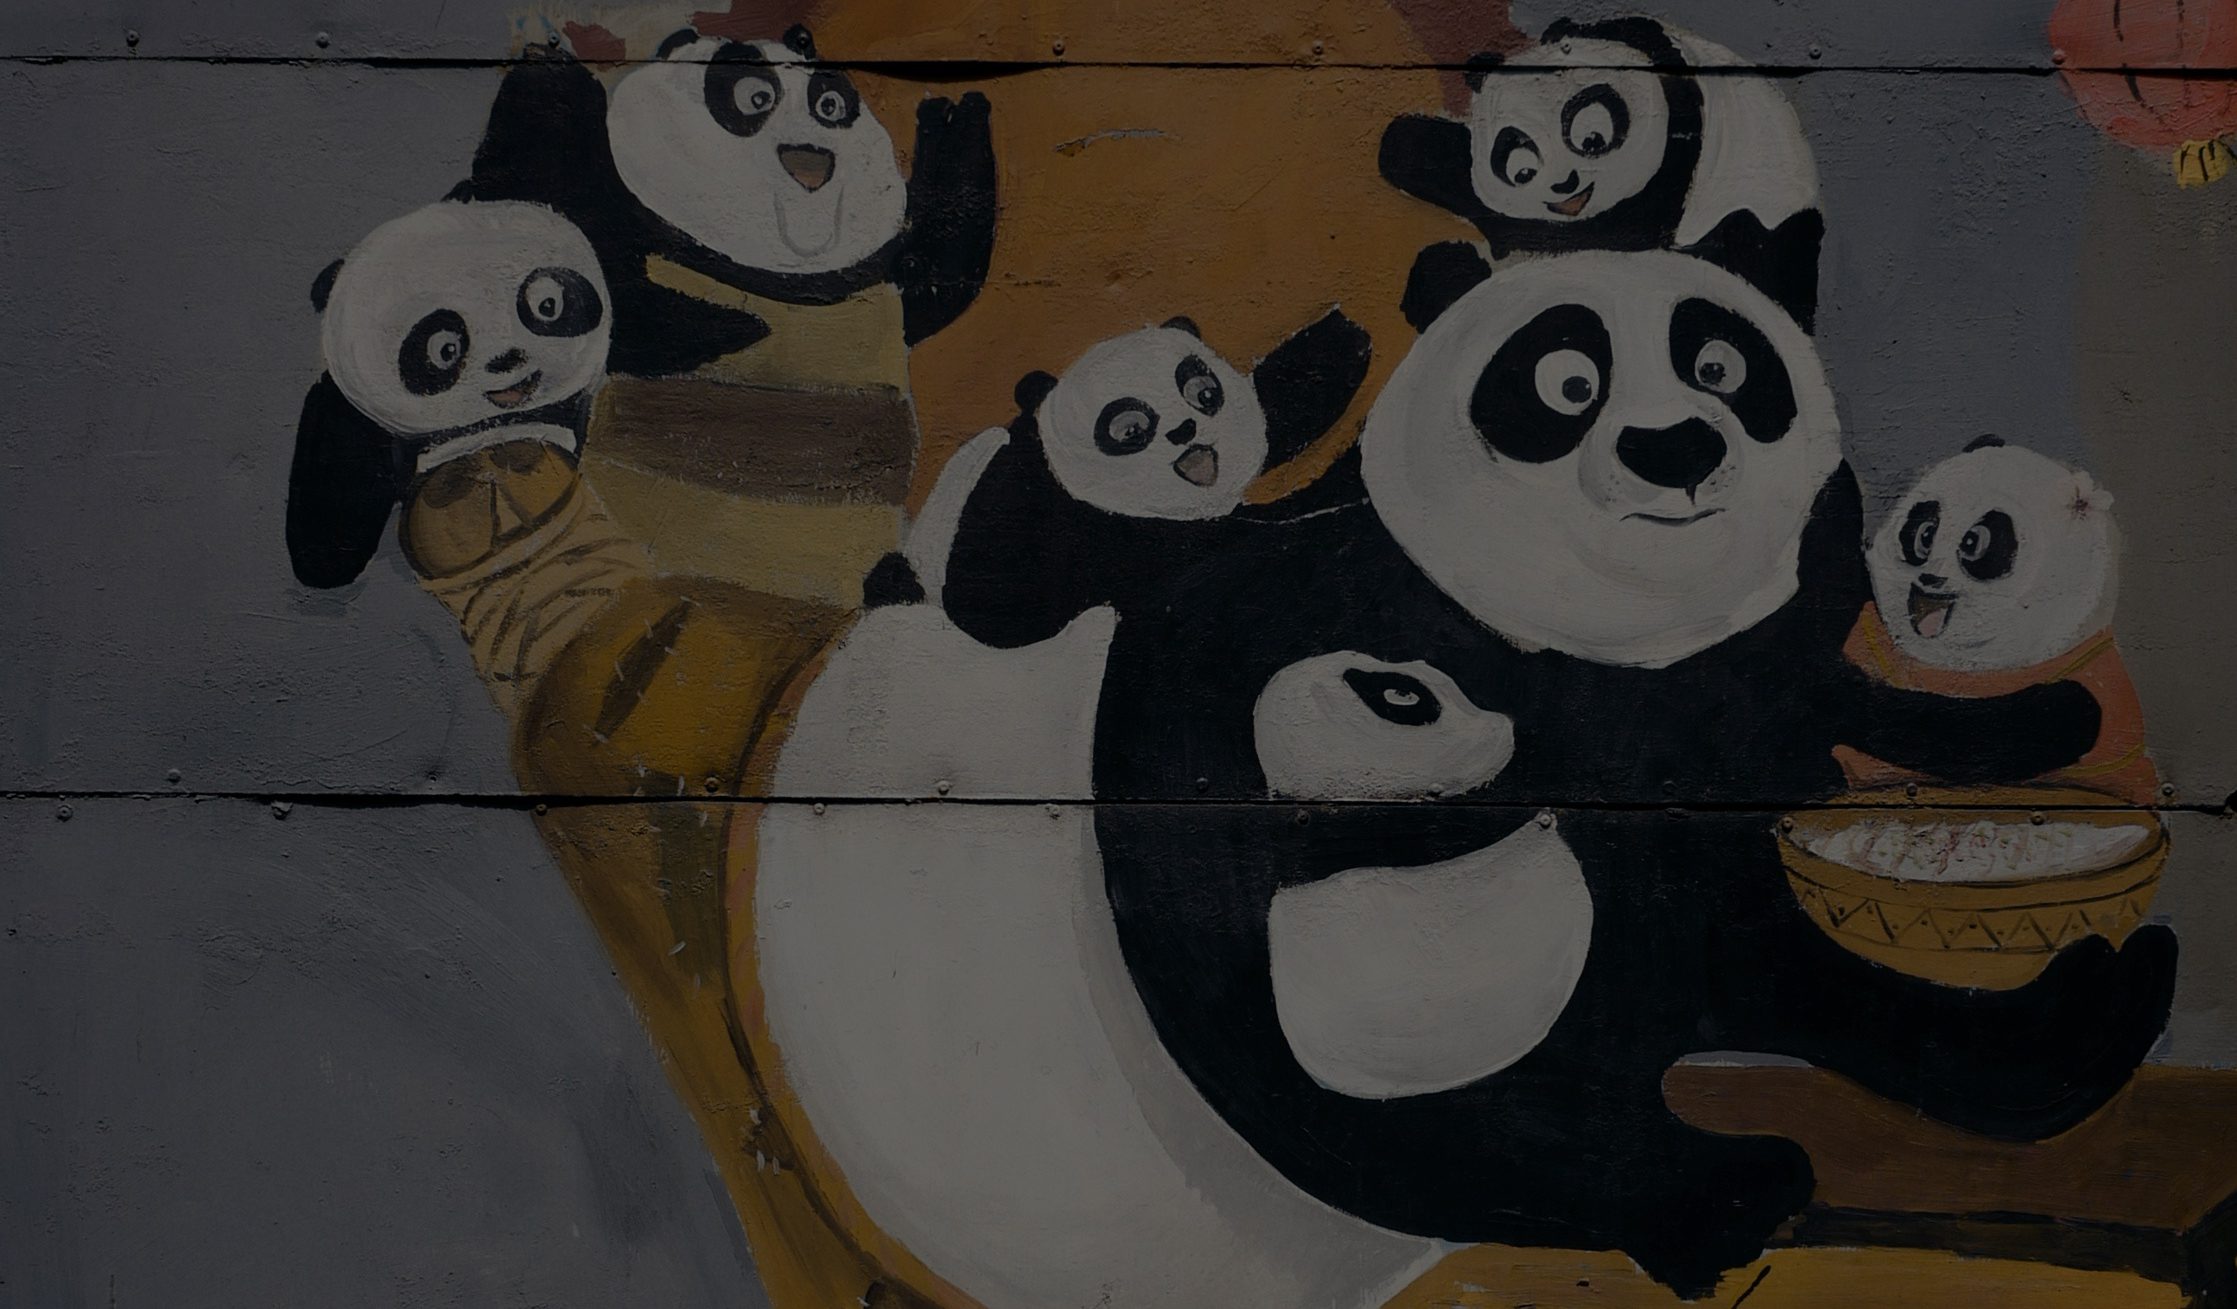 Kung Fu Panda: References to Traditional Chinese Medicine